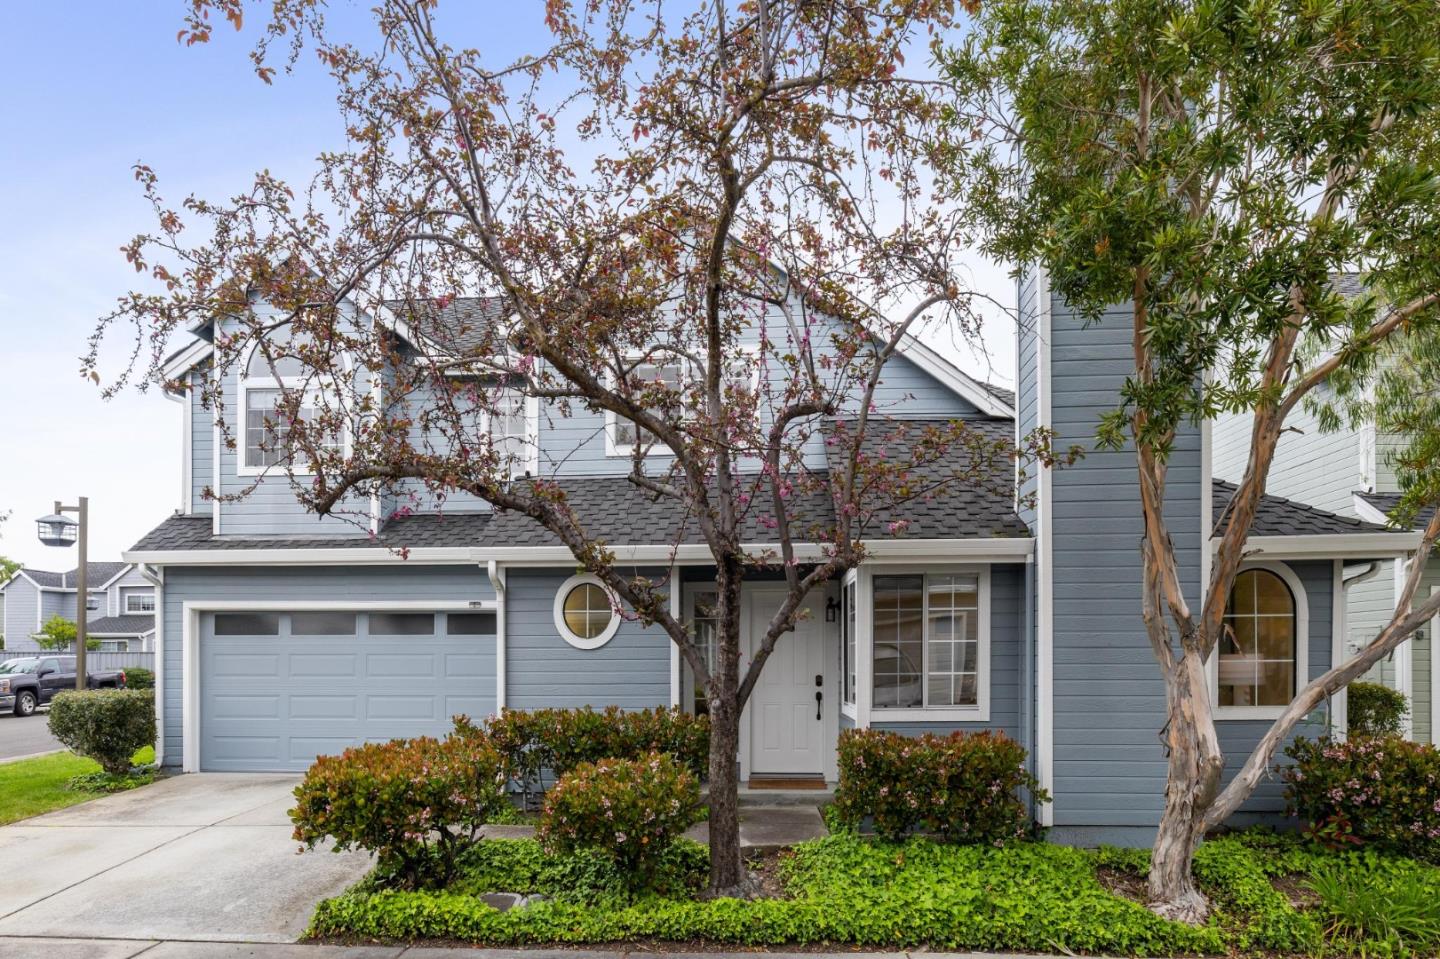 Photo of 38 Williams Ln in Foster City, CA